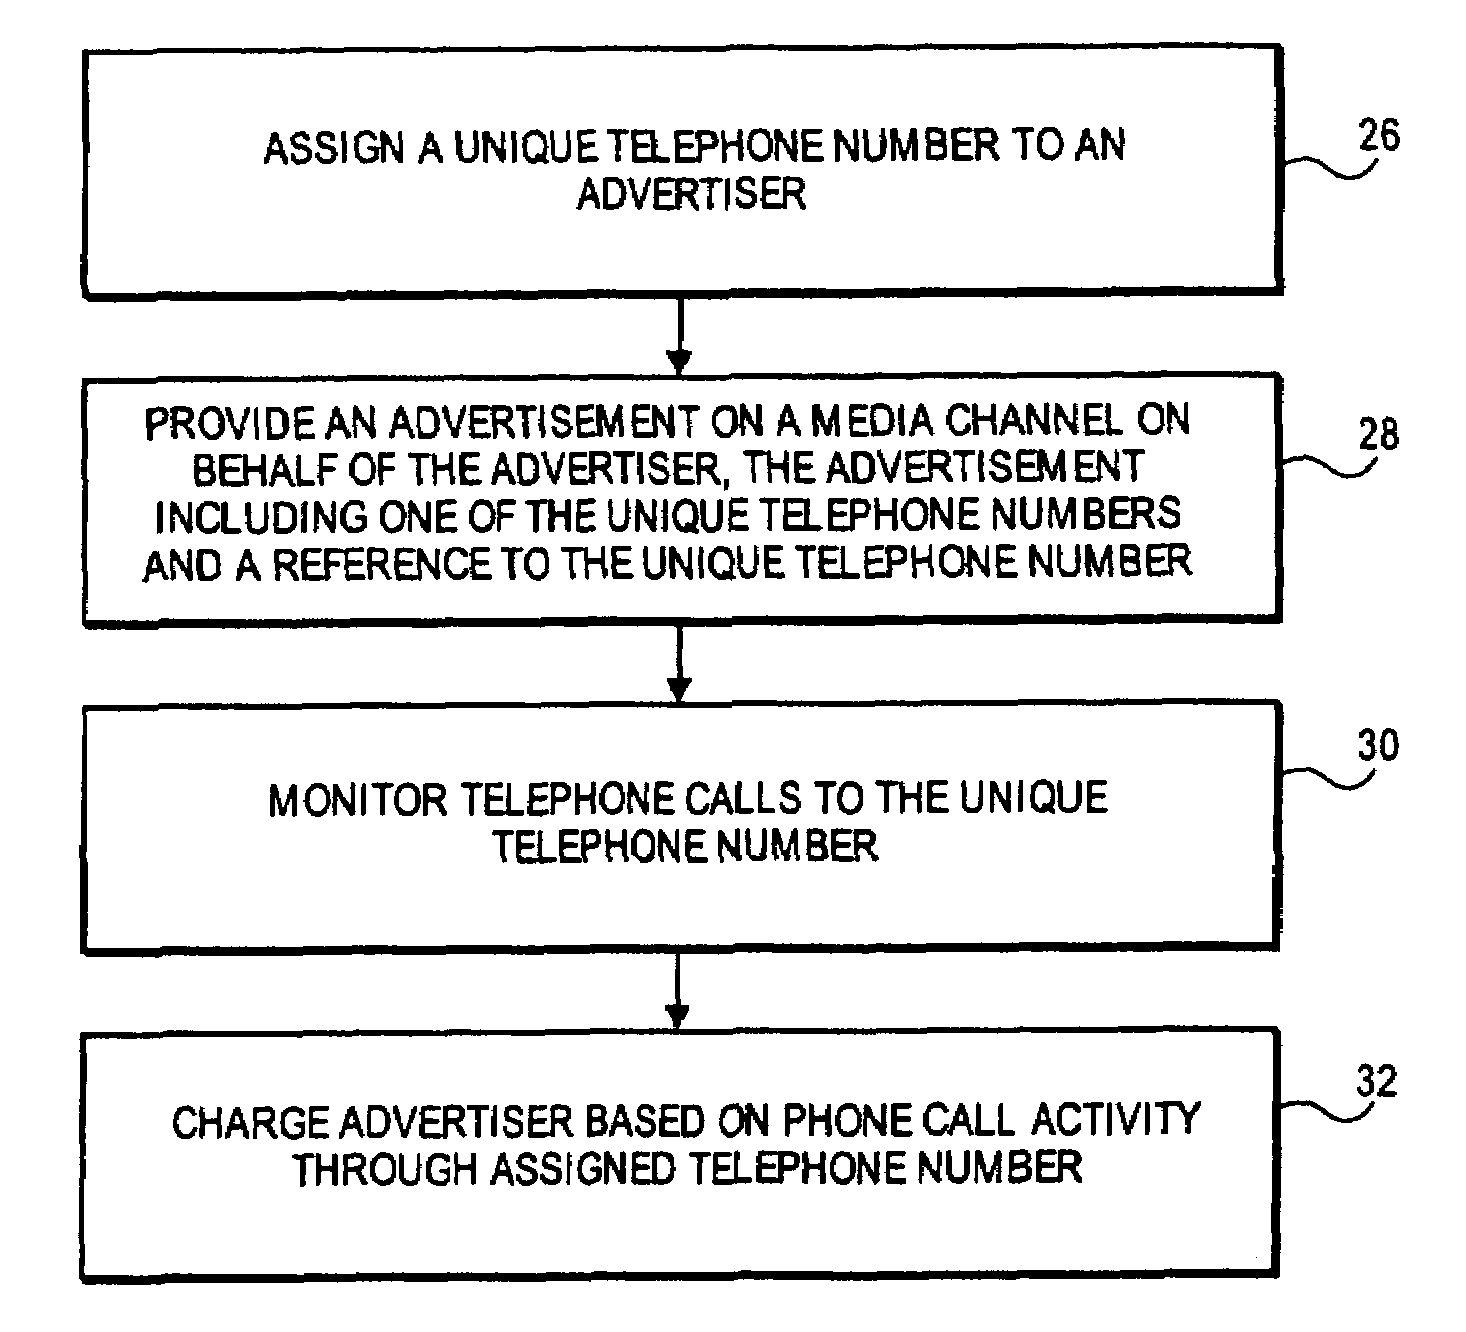 Methods and apparatuses for pay-per-call advertising in mobile/wireless applications